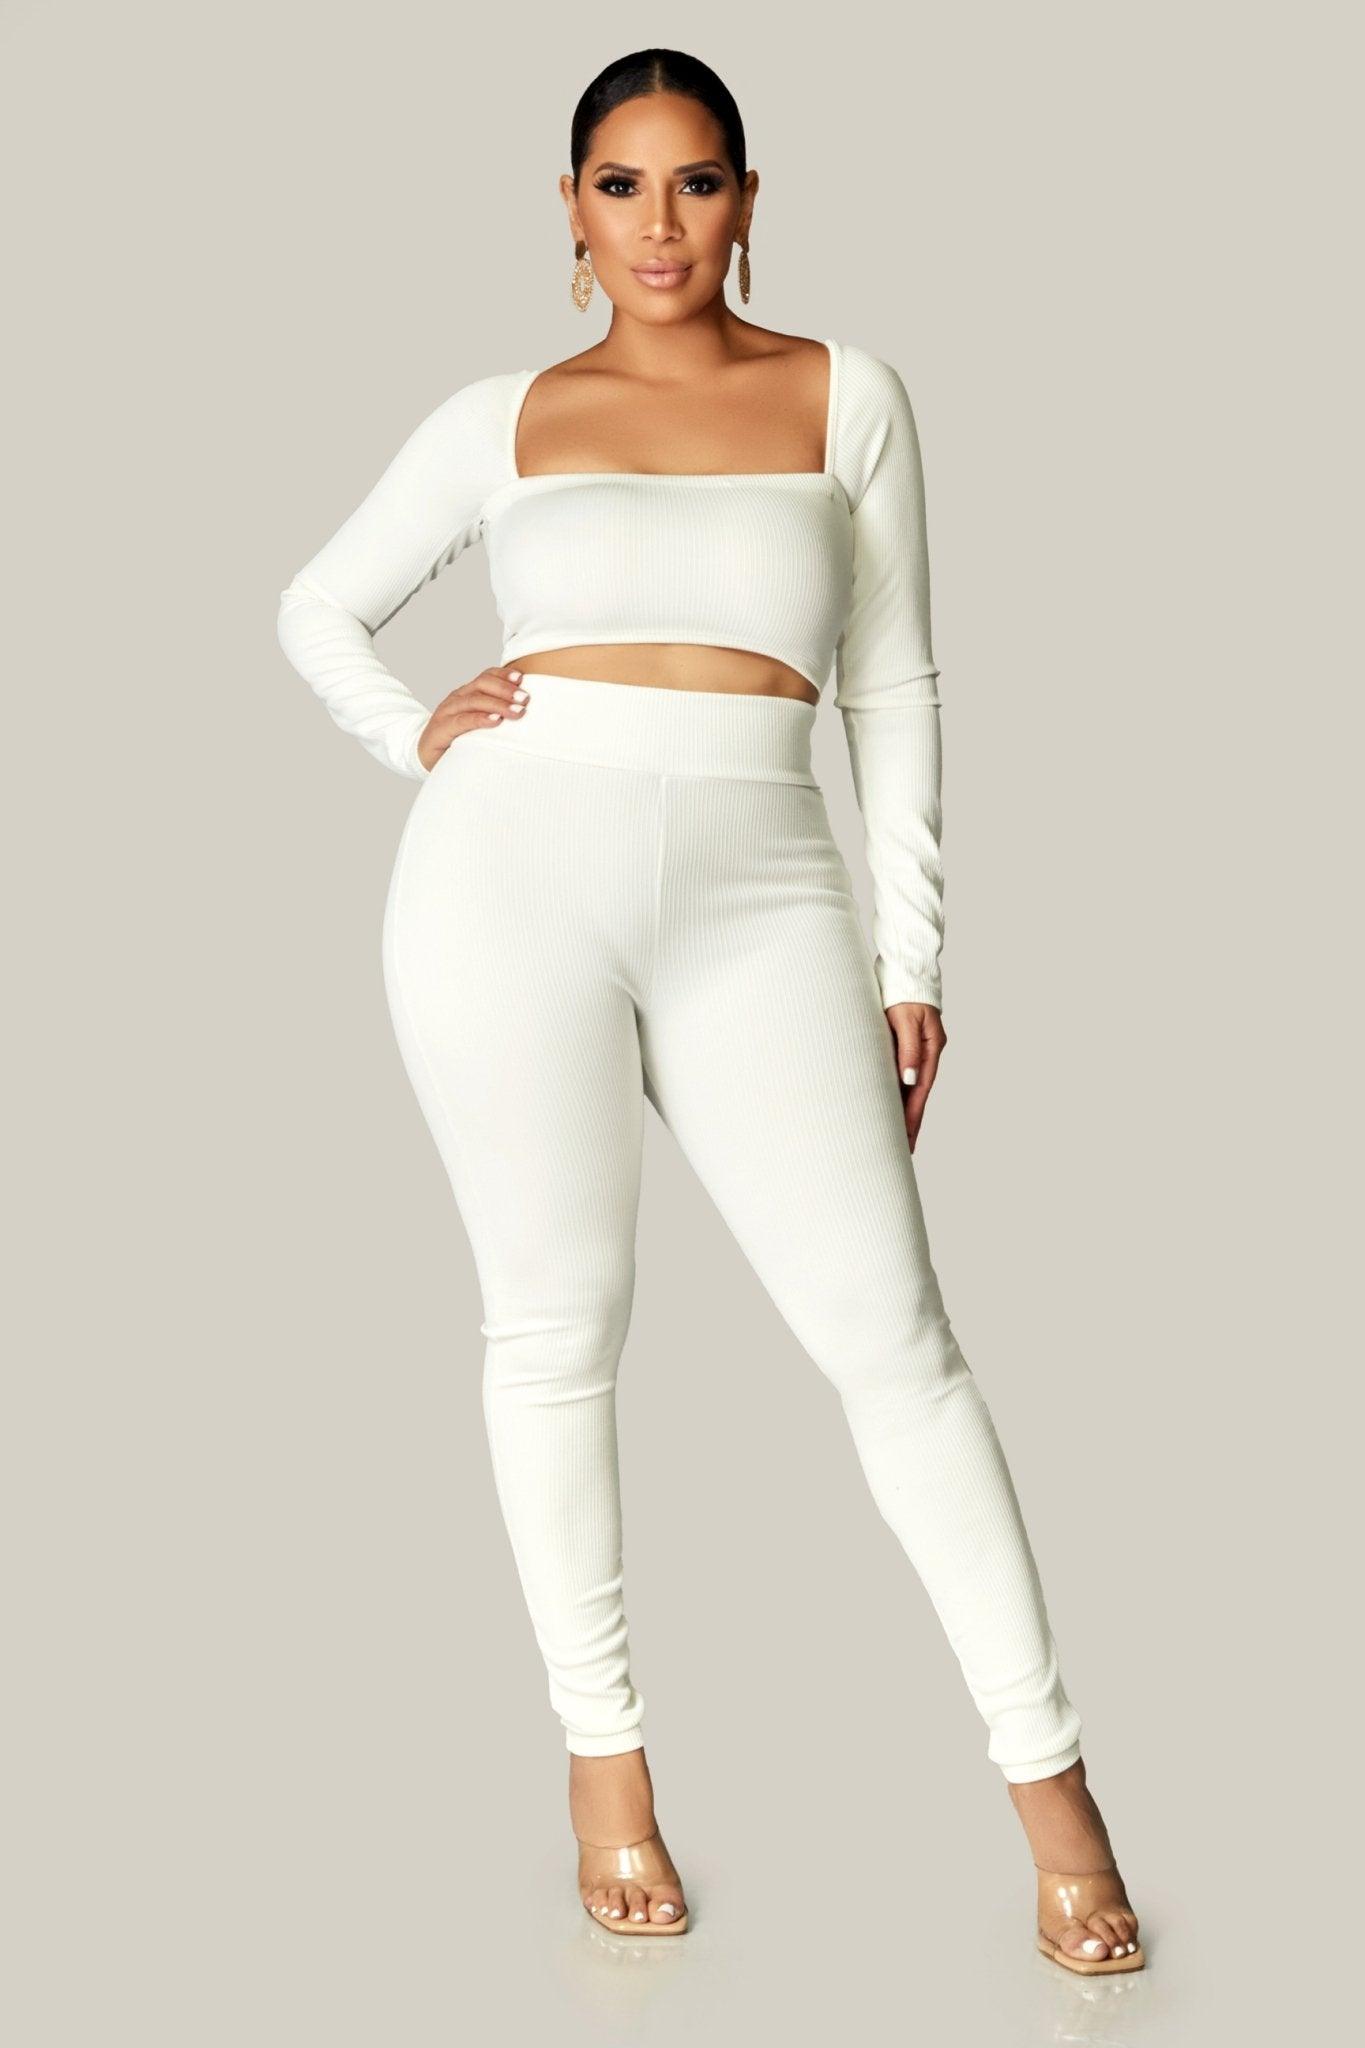 Luxia Solid Crop Top and Leggings Set - MY SEXY STYLES